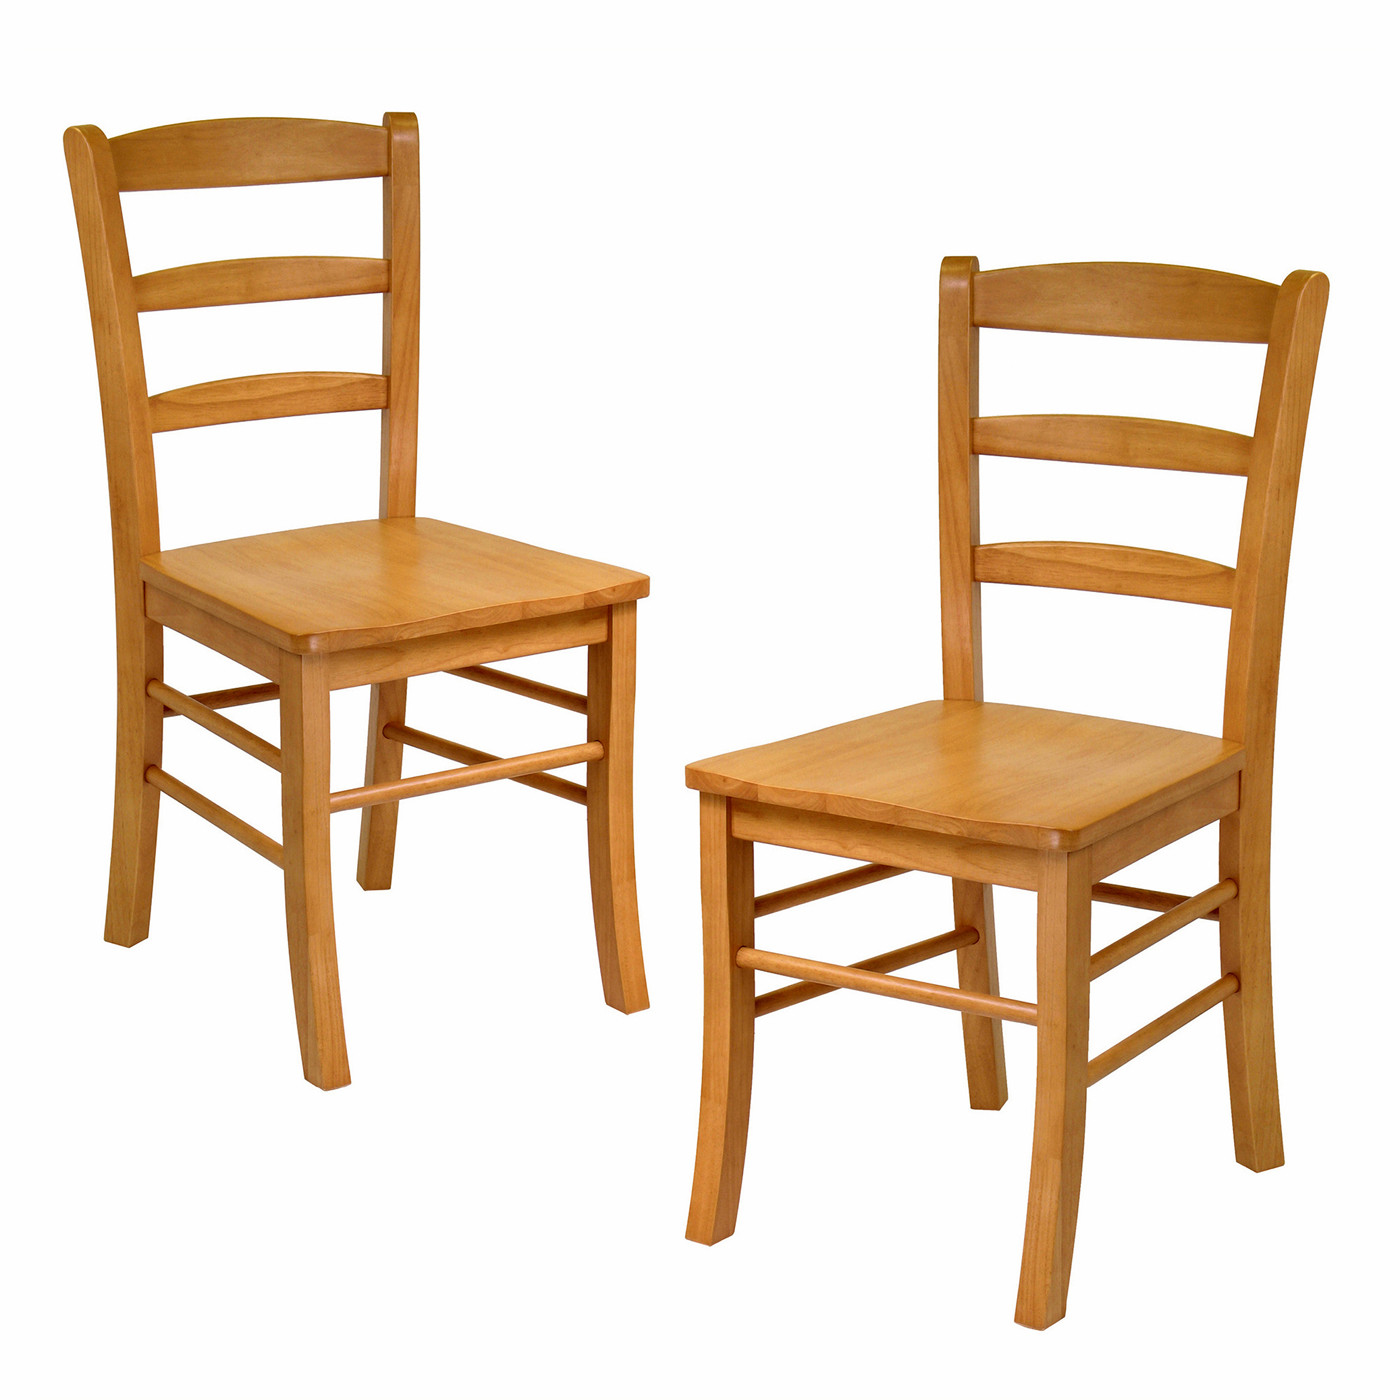 The Best Ideas for Wooden Kitchen Chairs - Best Collections Ever | Home